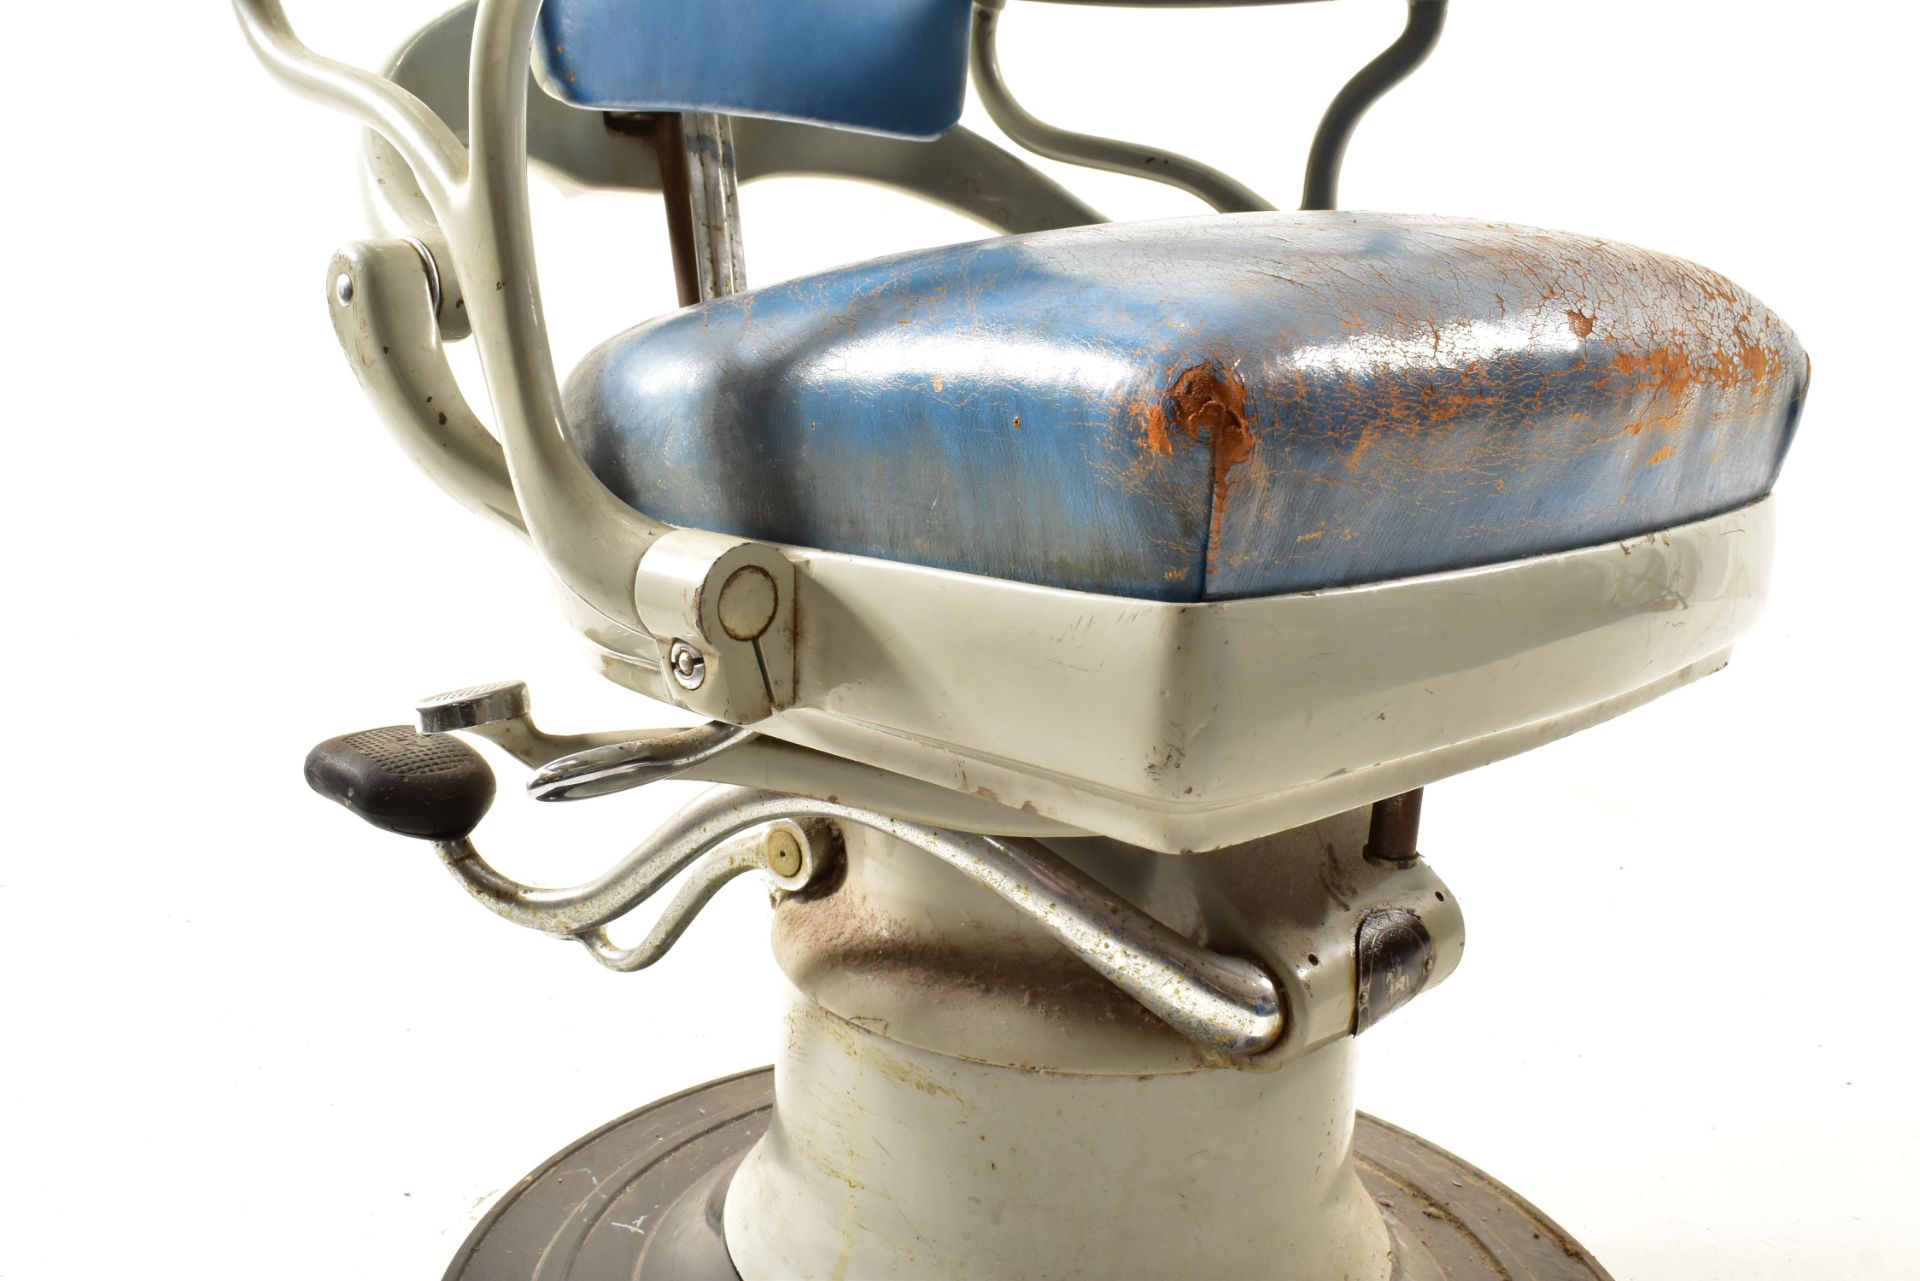 RITTER AG - MID CENTURY 1940S DENTIST ARTICULATED CHAIR - Image 4 of 8